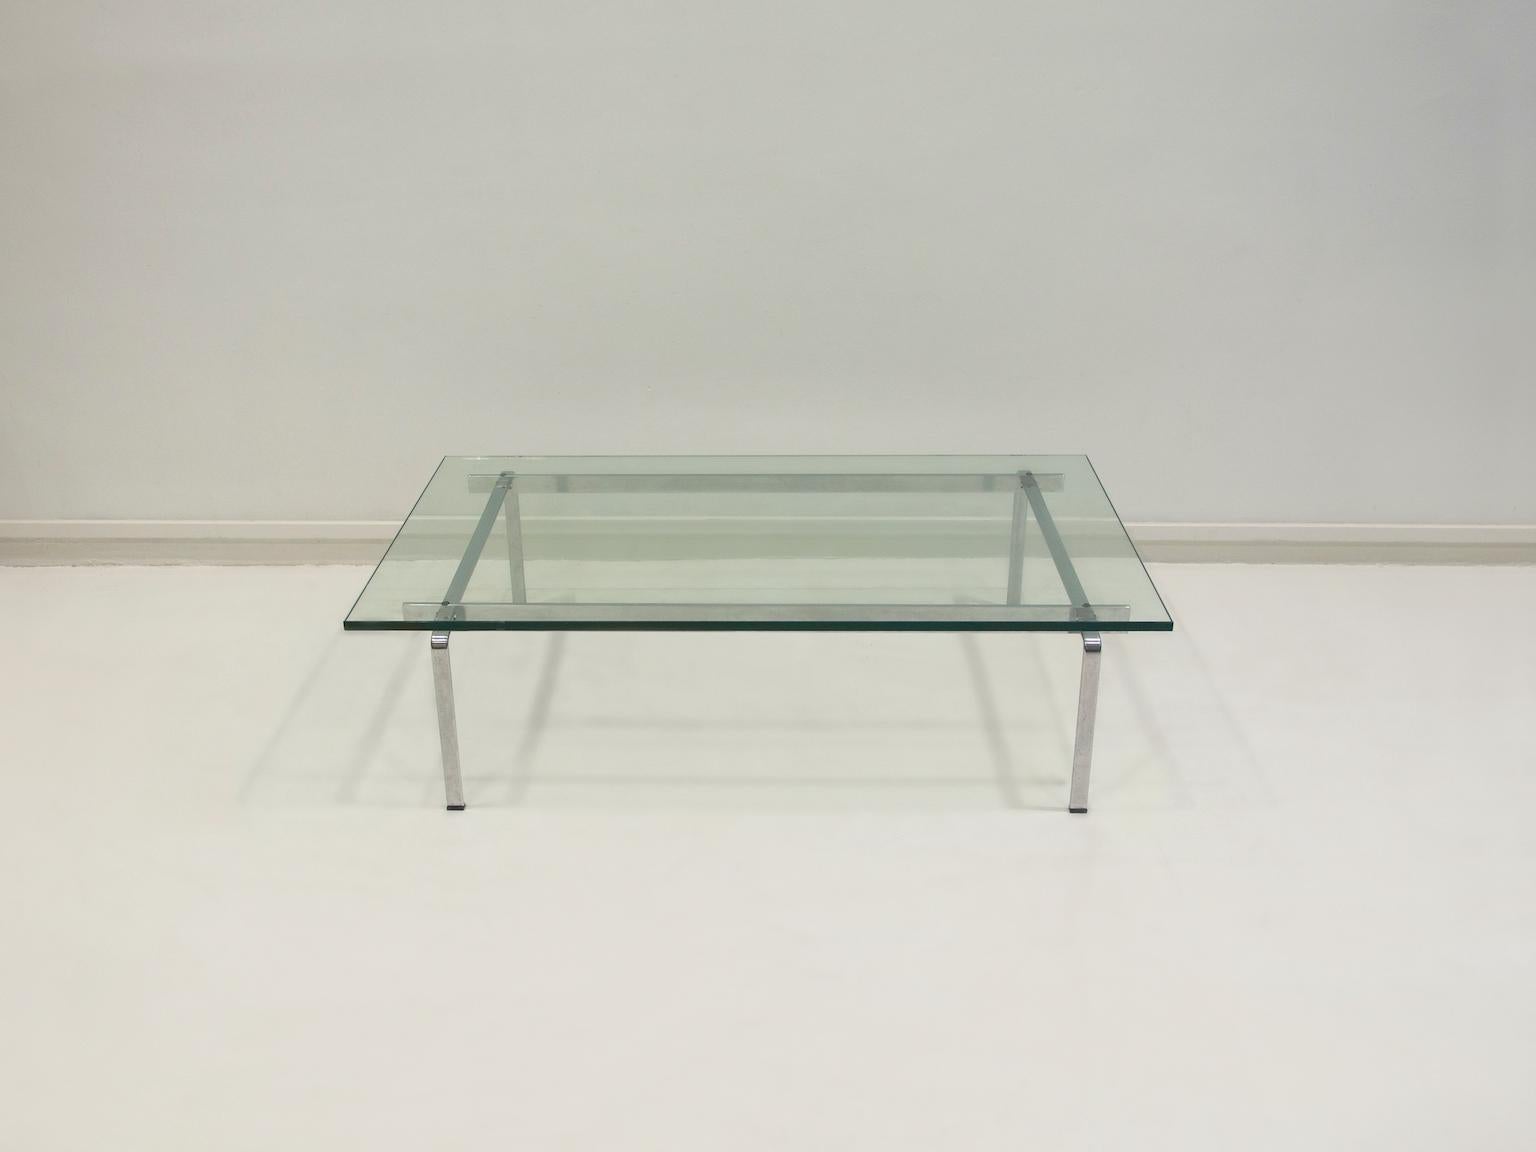 The FK 91 coffee table was designed by Preben Fabricius & Jørgen Kastholm in 1965 and originally produced by Kill International in Germany. This minimalist table has a chrome-plated steel frame and a table top of tempered glass. Manufactured by